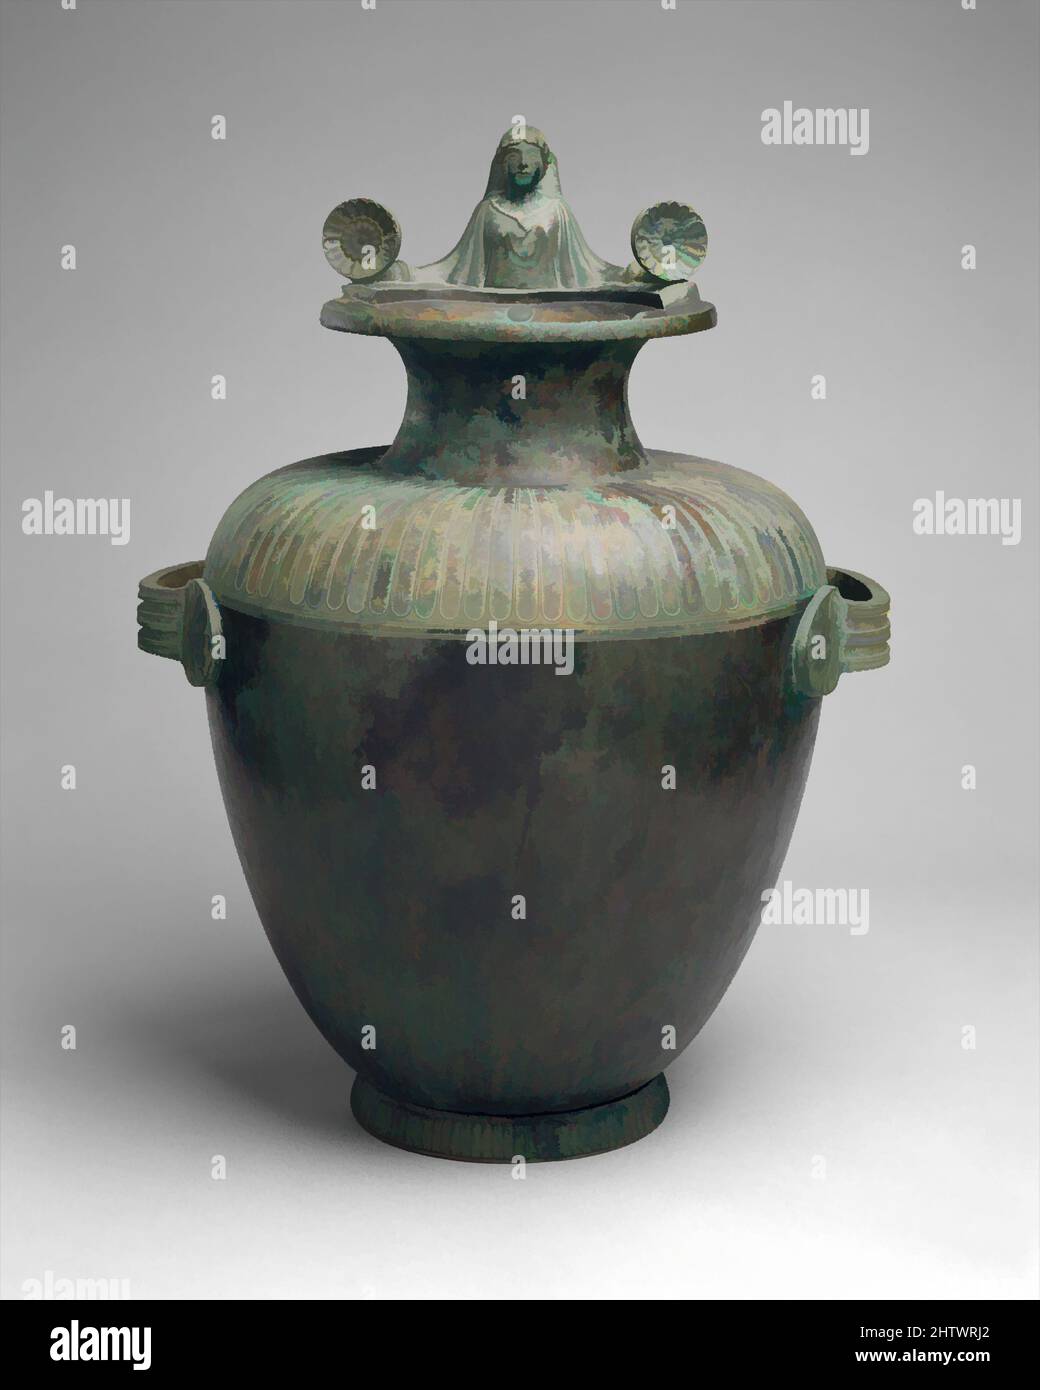 Art inspired by Bronze hydria (water jar), Classical, mid-5th century B.C., Greek, Argive, Bronze, H. with handle 20 1/4 in. (51.41 cm), Bronzes, Inscribed on top of the mouth 'one of the prizes from Argive Hera'. This hydria, like Greek art in all its forms, is marked by clearly, Classic works modernized by Artotop with a splash of modernity. Shapes, color and value, eye-catching visual impact on art. Emotions through freedom of artworks in a contemporary way. A timeless message pursuing a wildly creative new direction. Artists turning to the digital medium and creating the Artotop NFT Stock Photo